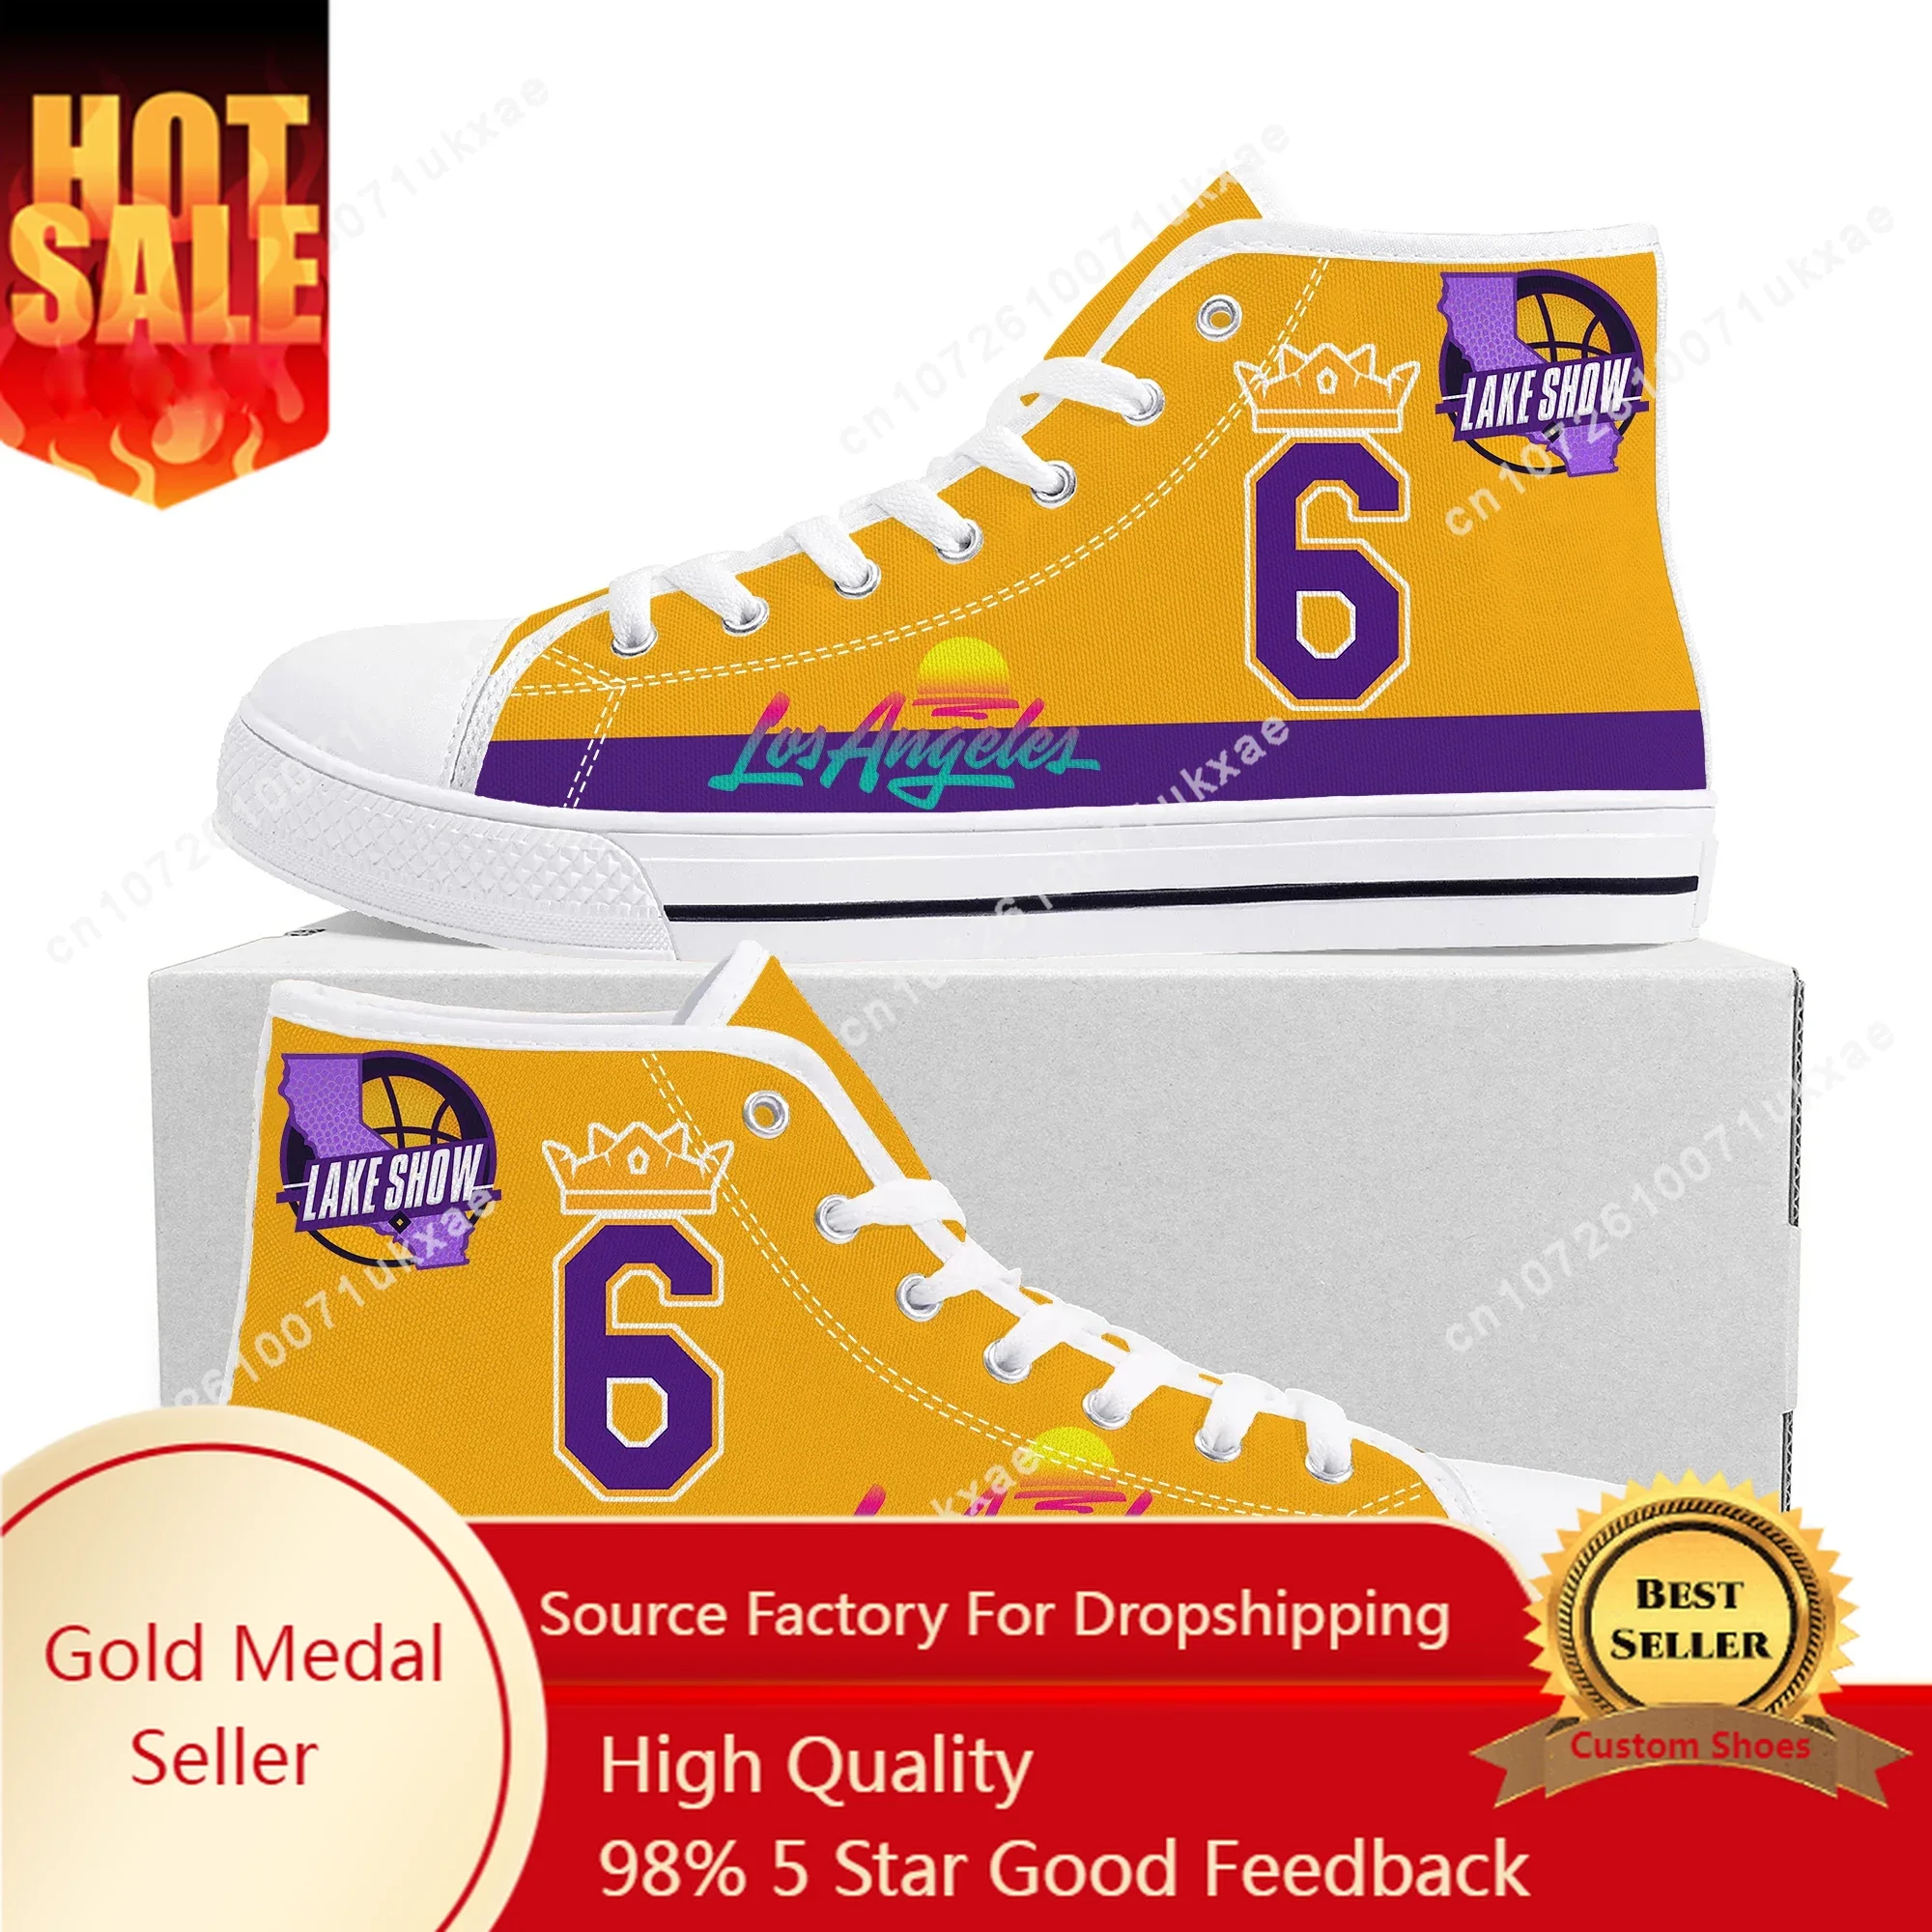 

Los Angeles Number 6 3 1 lake show High Top Sneakers Mens Womens Teenager Canvas Sneaker Casual Custom Made Shoes Customize Shoe